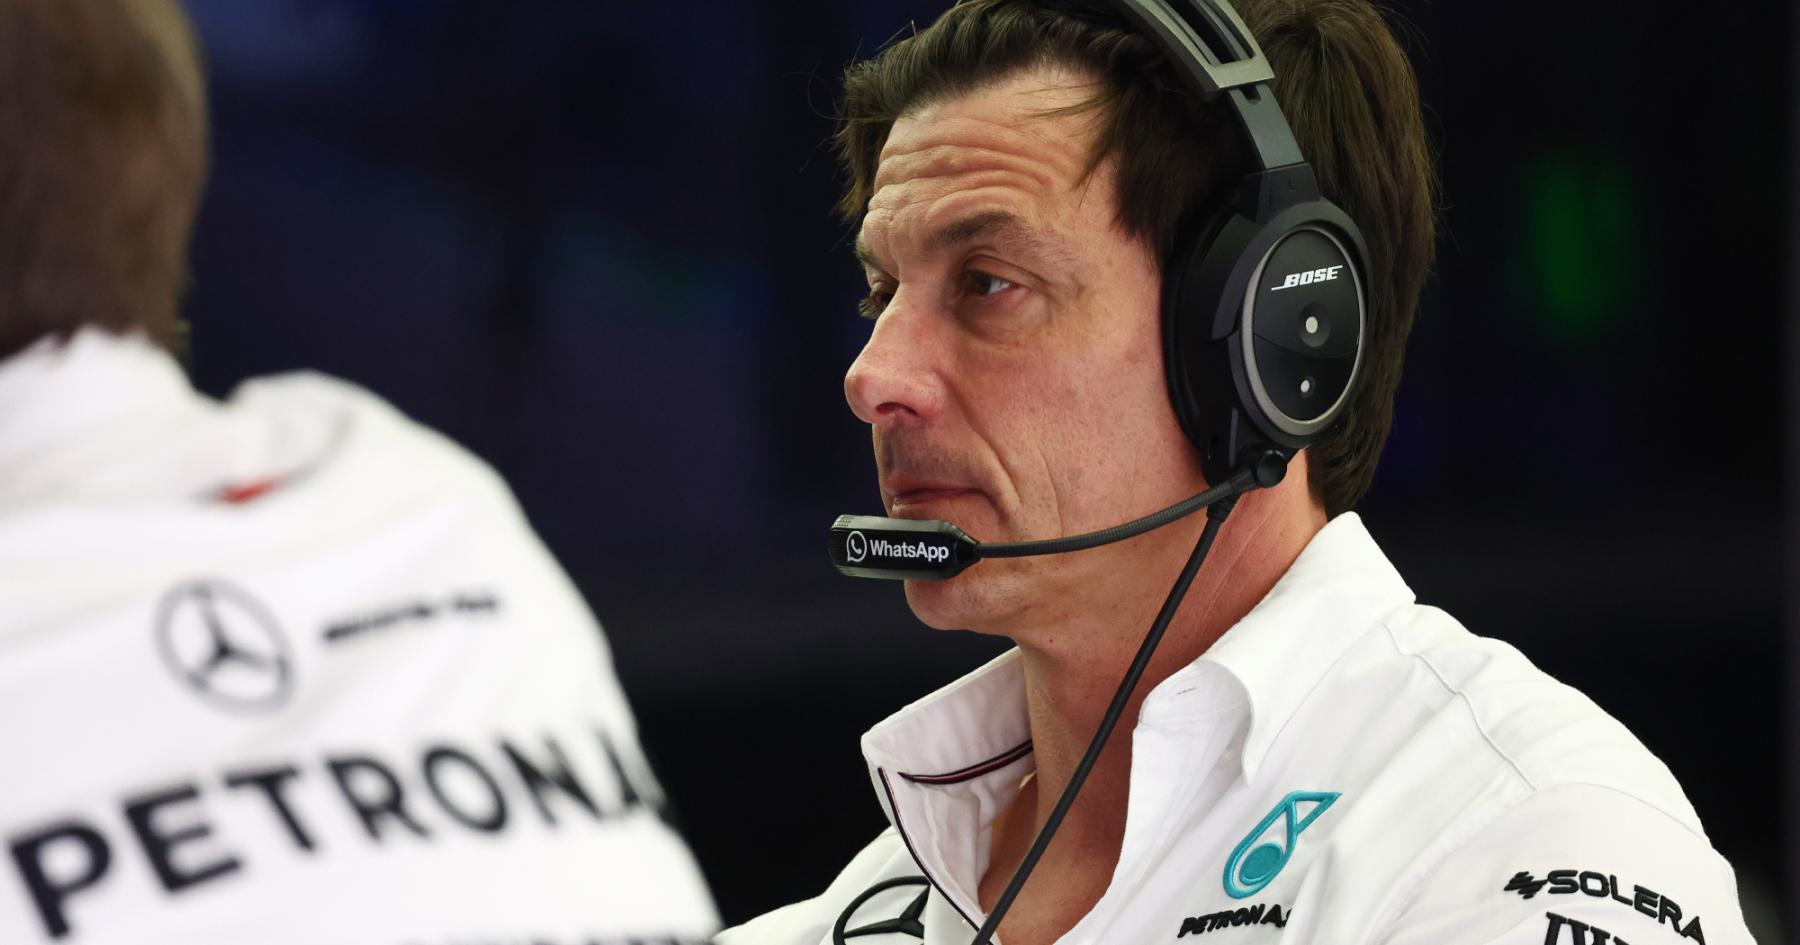 Revving Up for Success: Wolff Leads Mercedes in Pursuit of Excellence